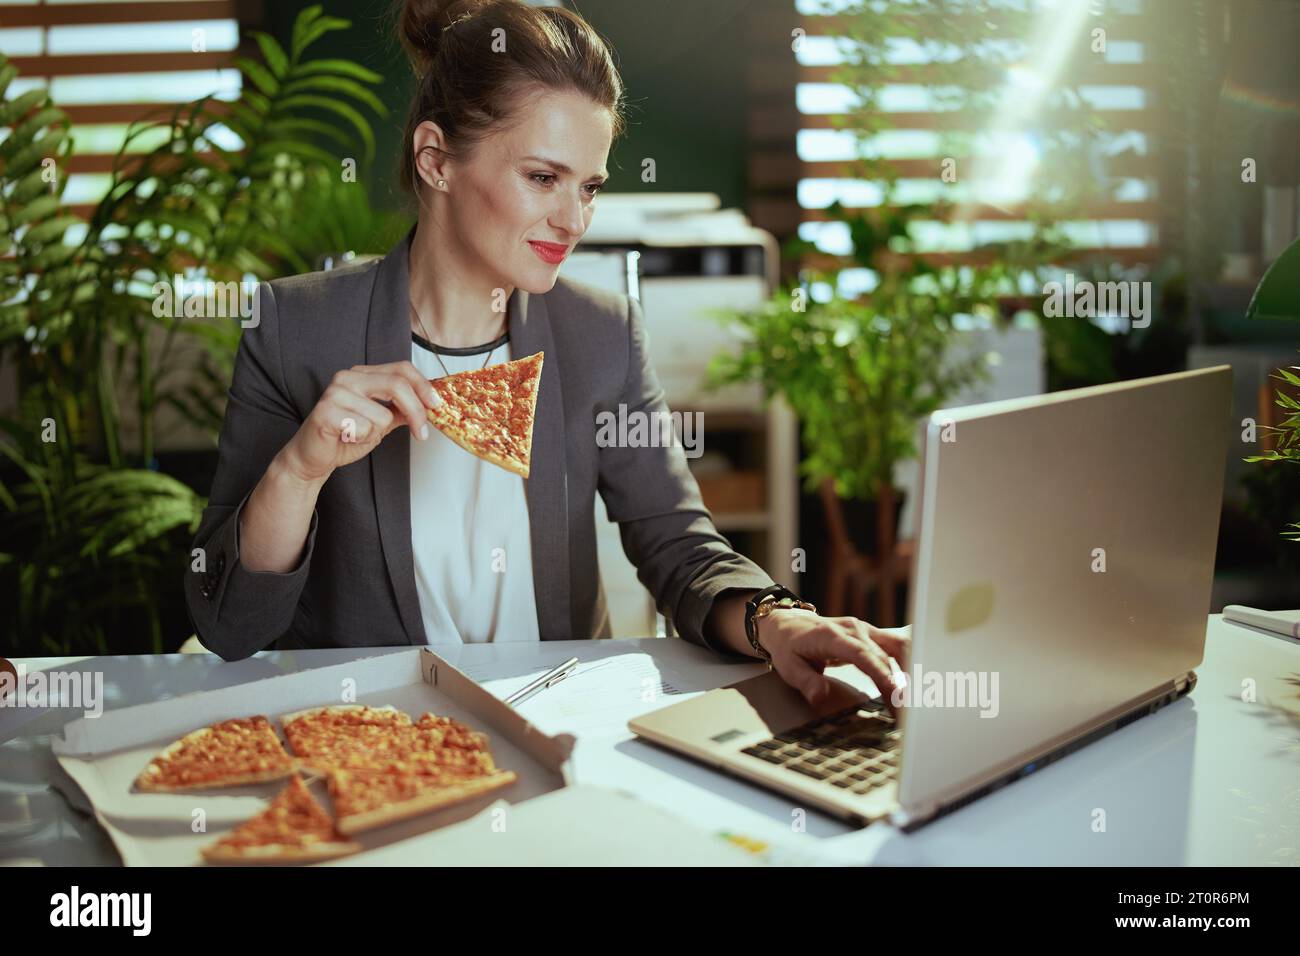 Sustainable workplace. modern small business owner woman in a grey business suit in modern green office with pizza and laptop. Stock Photo